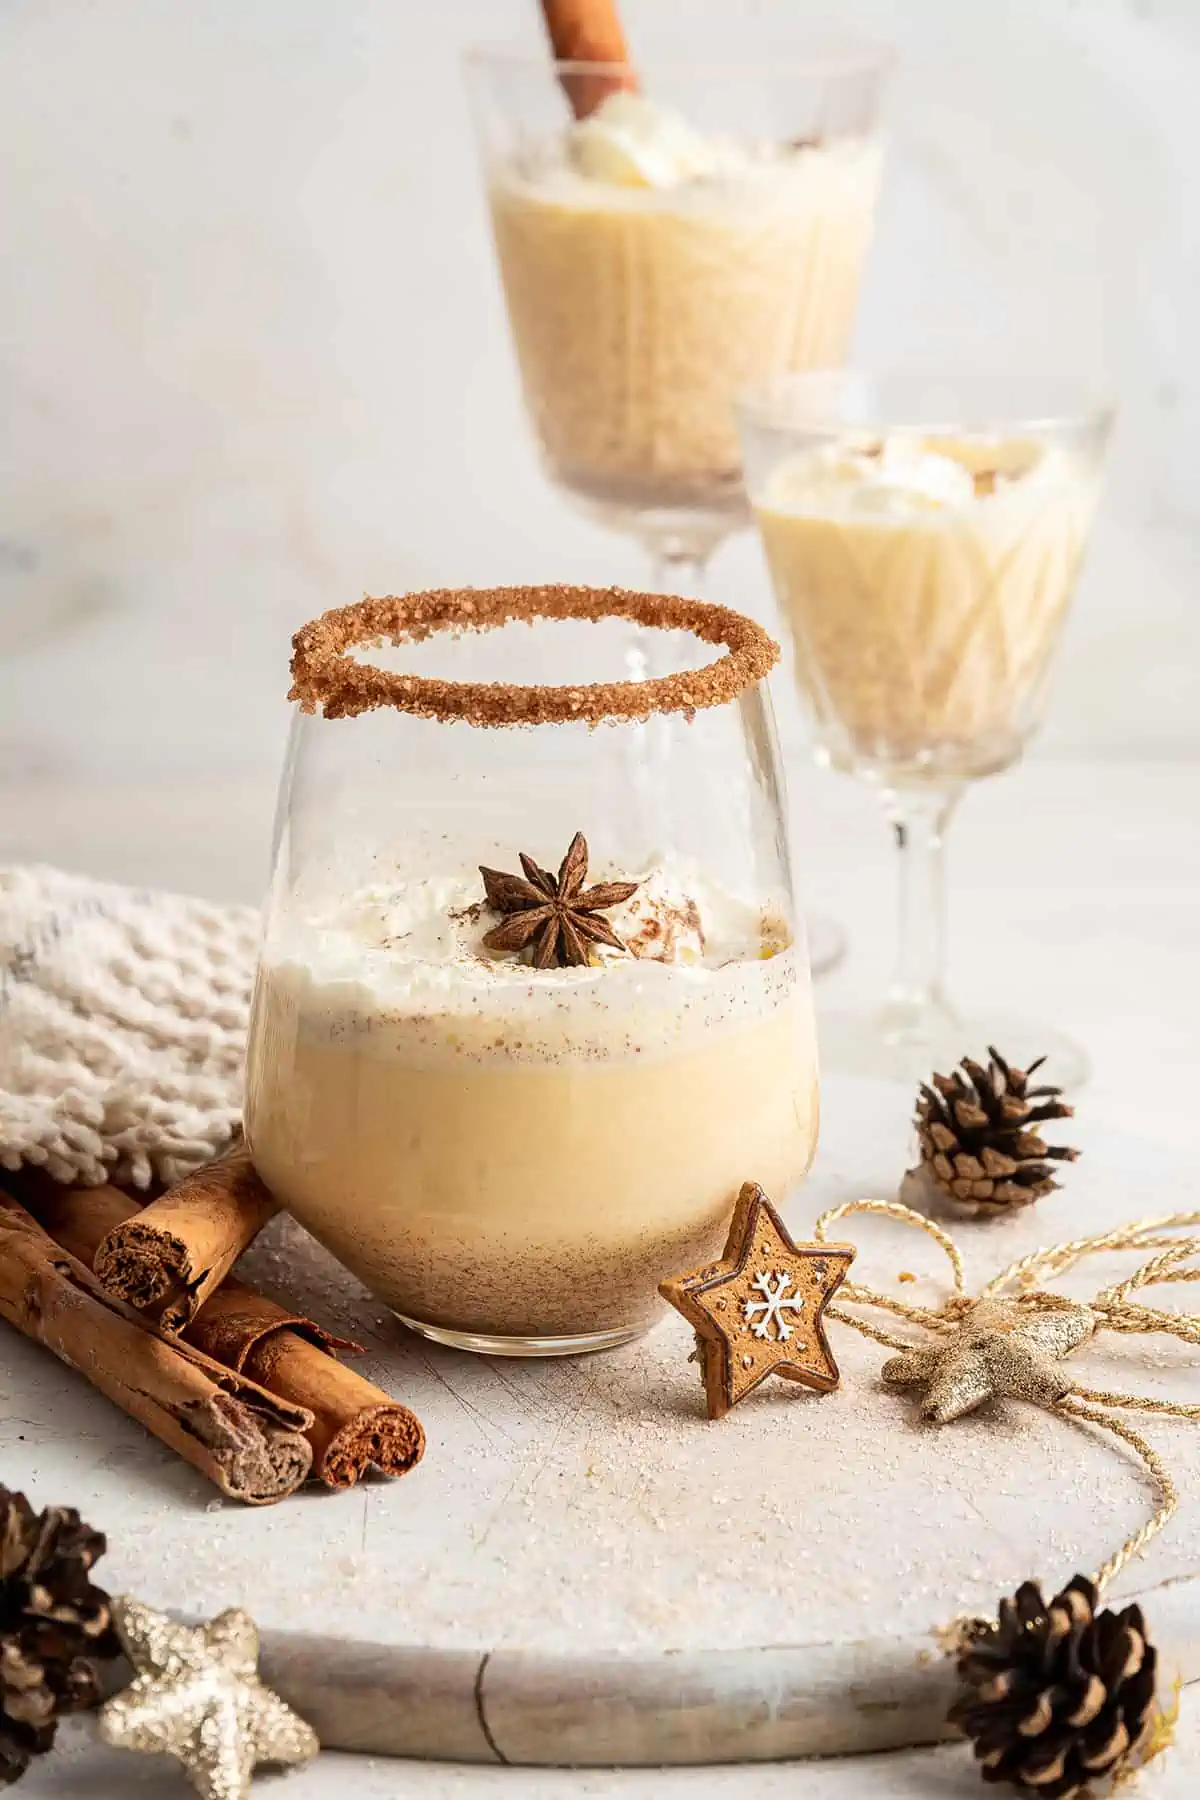 A glass of Southern Comfort eggnog, topped with whipped cream and a star anise pod, with two glasses of eggnog in the background, and cinnamon sticks in the foreground, with the glass next to a pinecone